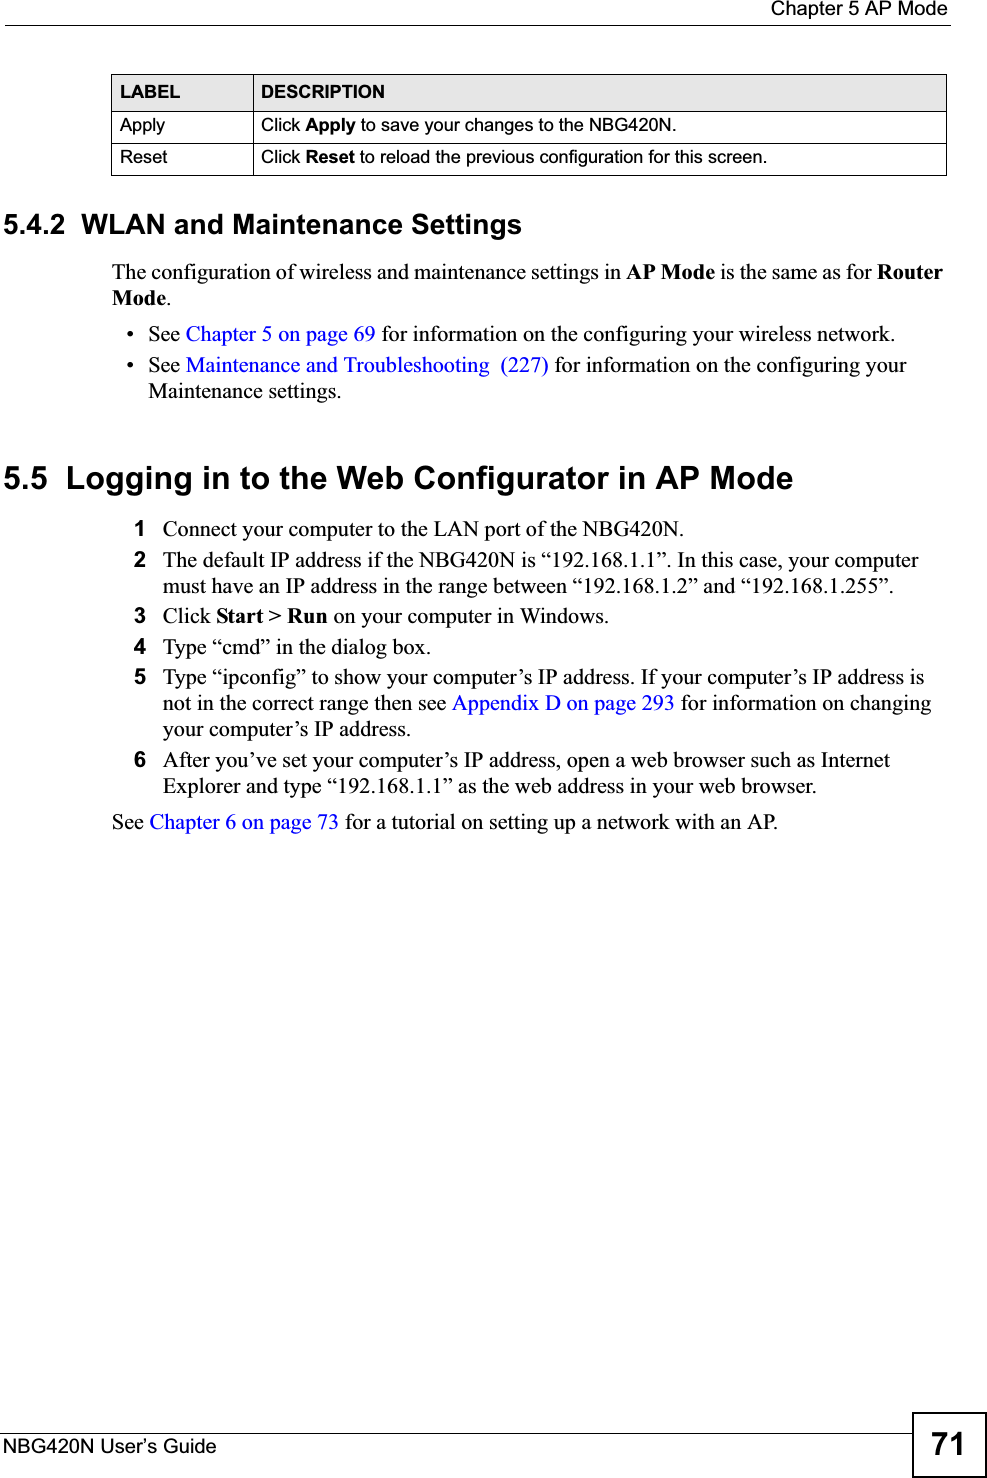  Chapter 5 AP ModeNBG420N User’s Guide 715.4.2  WLAN and Maintenance SettingsThe configuration of wireless and maintenance settings in AP Mode is the same as for RouterMode.• See Chapter 5 on page 69 for information on the configuring your wireless network.• See Maintenance and Troubleshooting  (227) for information on the configuring your Maintenance settings. 5.5  Logging in to the Web Configurator in AP Mode1Connect your computer to the LAN port of the NBG420N. 2The default IP address if the NBG420N is “192.168.1.1”. In this case, your computer must have an IP address in the range between “192.168.1.2” and “192.168.1.255”.3Click Start &gt; Run on your computer in Windows. 4Type “cmd” in the dialog box.5Type “ipconfig” to show your computer’s IP address. If your computer’s IP address is not in the correct range then see Appendix D on page 293 for information on changing your computer’s IP address.6After you’ve set your computer’s IP address, open a web browser such as Internet Explorer and type “192.168.1.1” as the web address in your web browser.See Chapter 6 on page 73 for a tutorial on setting up a network with an AP.Apply Click Apply to save your changes to the NBG420N.Reset Click Reset to reload the previous configuration for this screen.LABEL DESCRIPTION